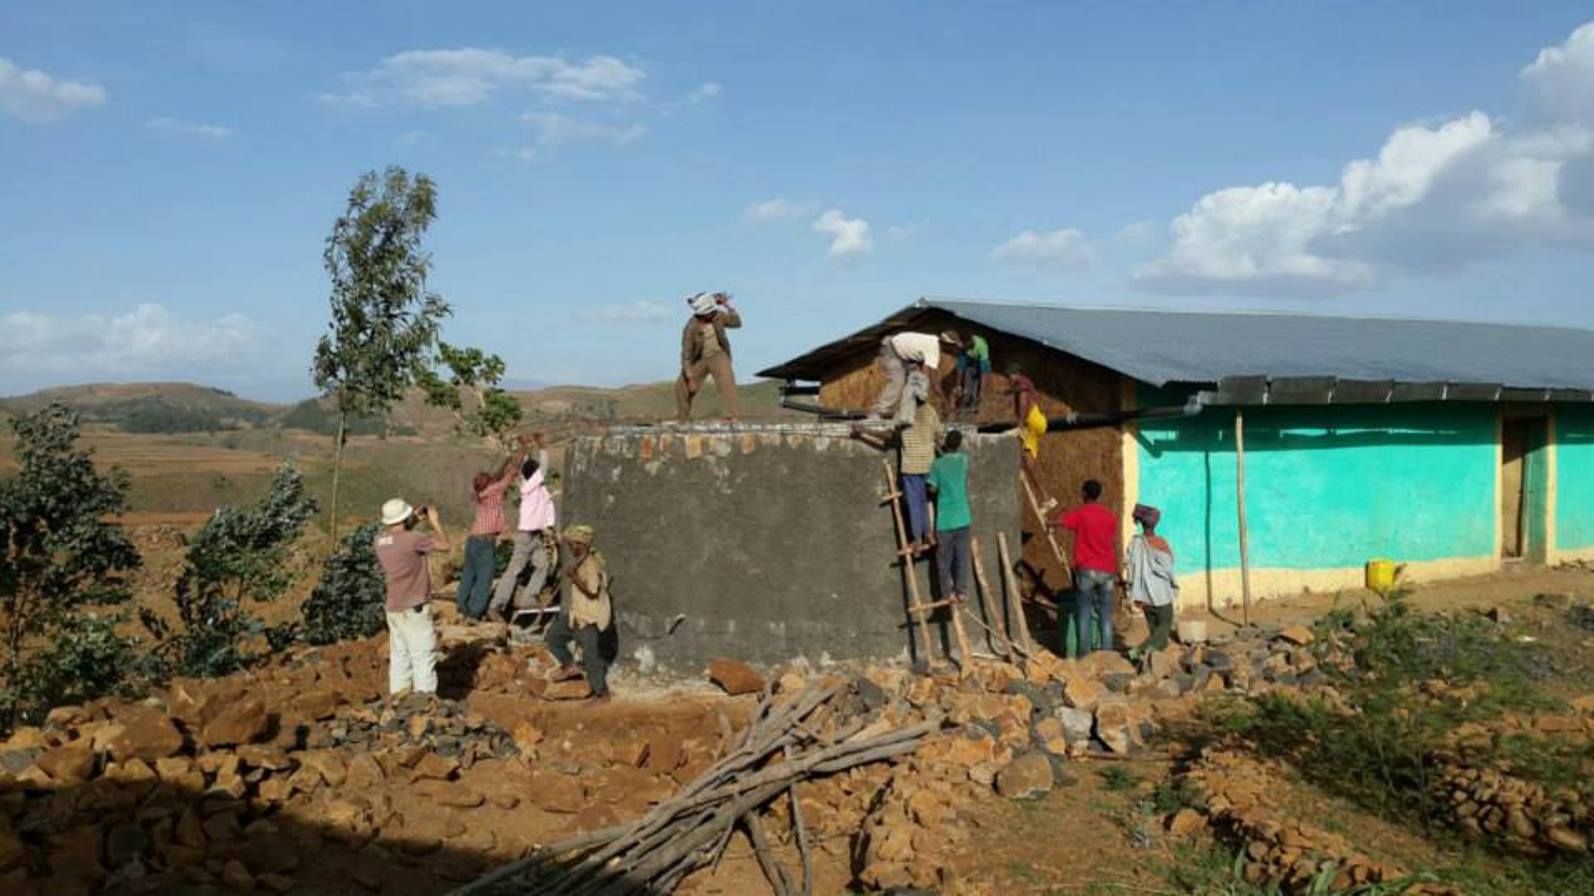 Technion students in Ethiopia checking the new water system with local residents. Photo courtesy of Nimrod Polonsky, Matan Segman, Tal Dana/Technion’s Spokesperson’s Office